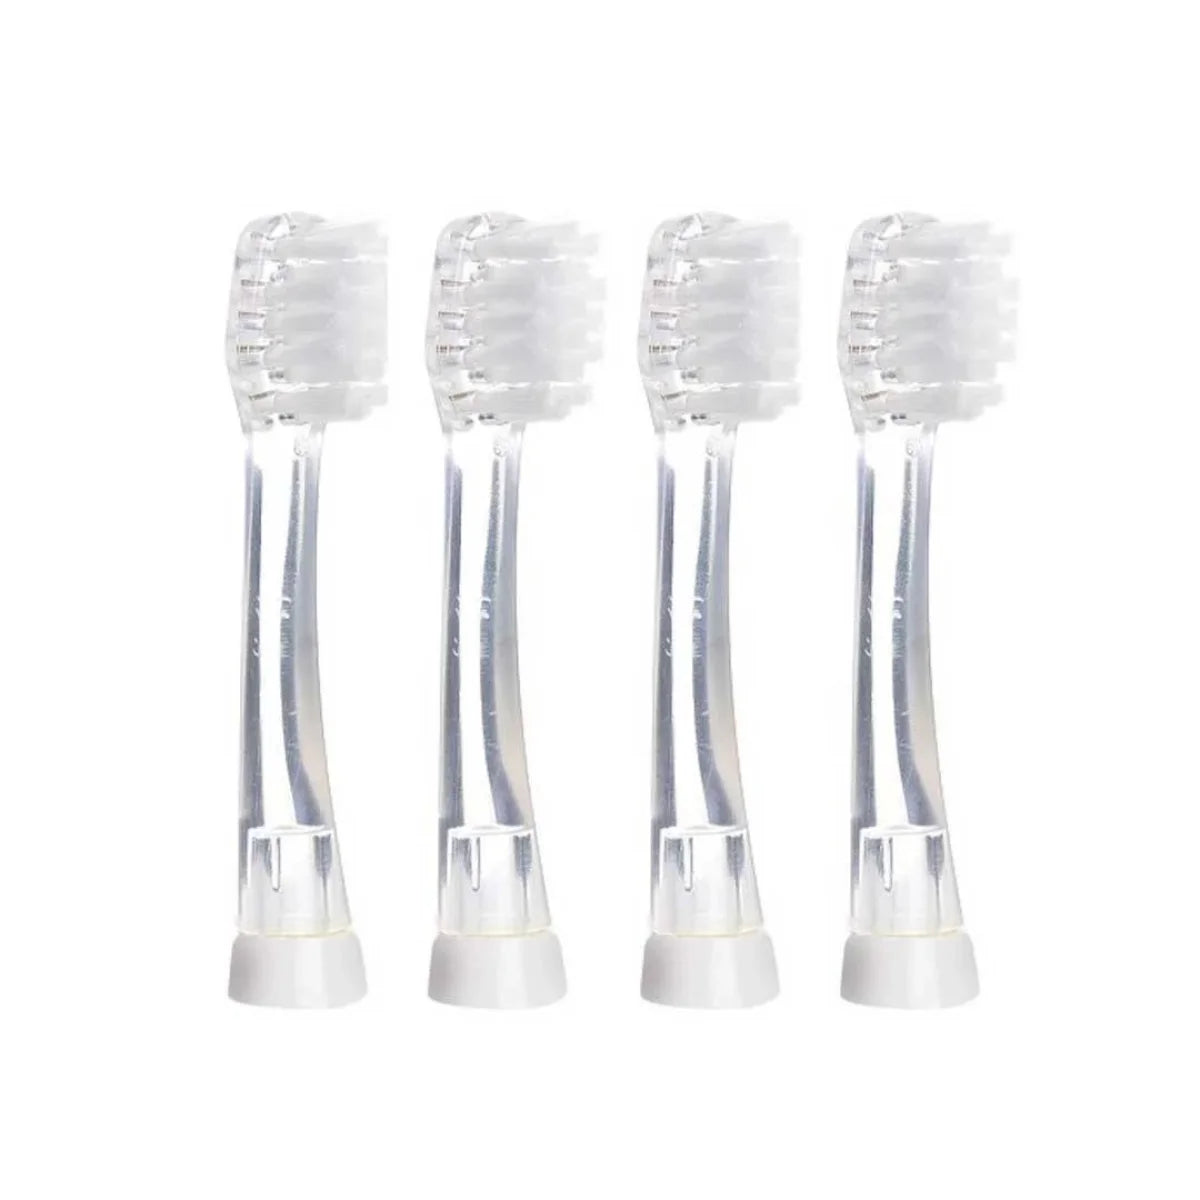 Clear White pack of 4 Kids Electric Toothbrush replacement brush heads for Babysonic toothbrushes for 18 - 36 month olds